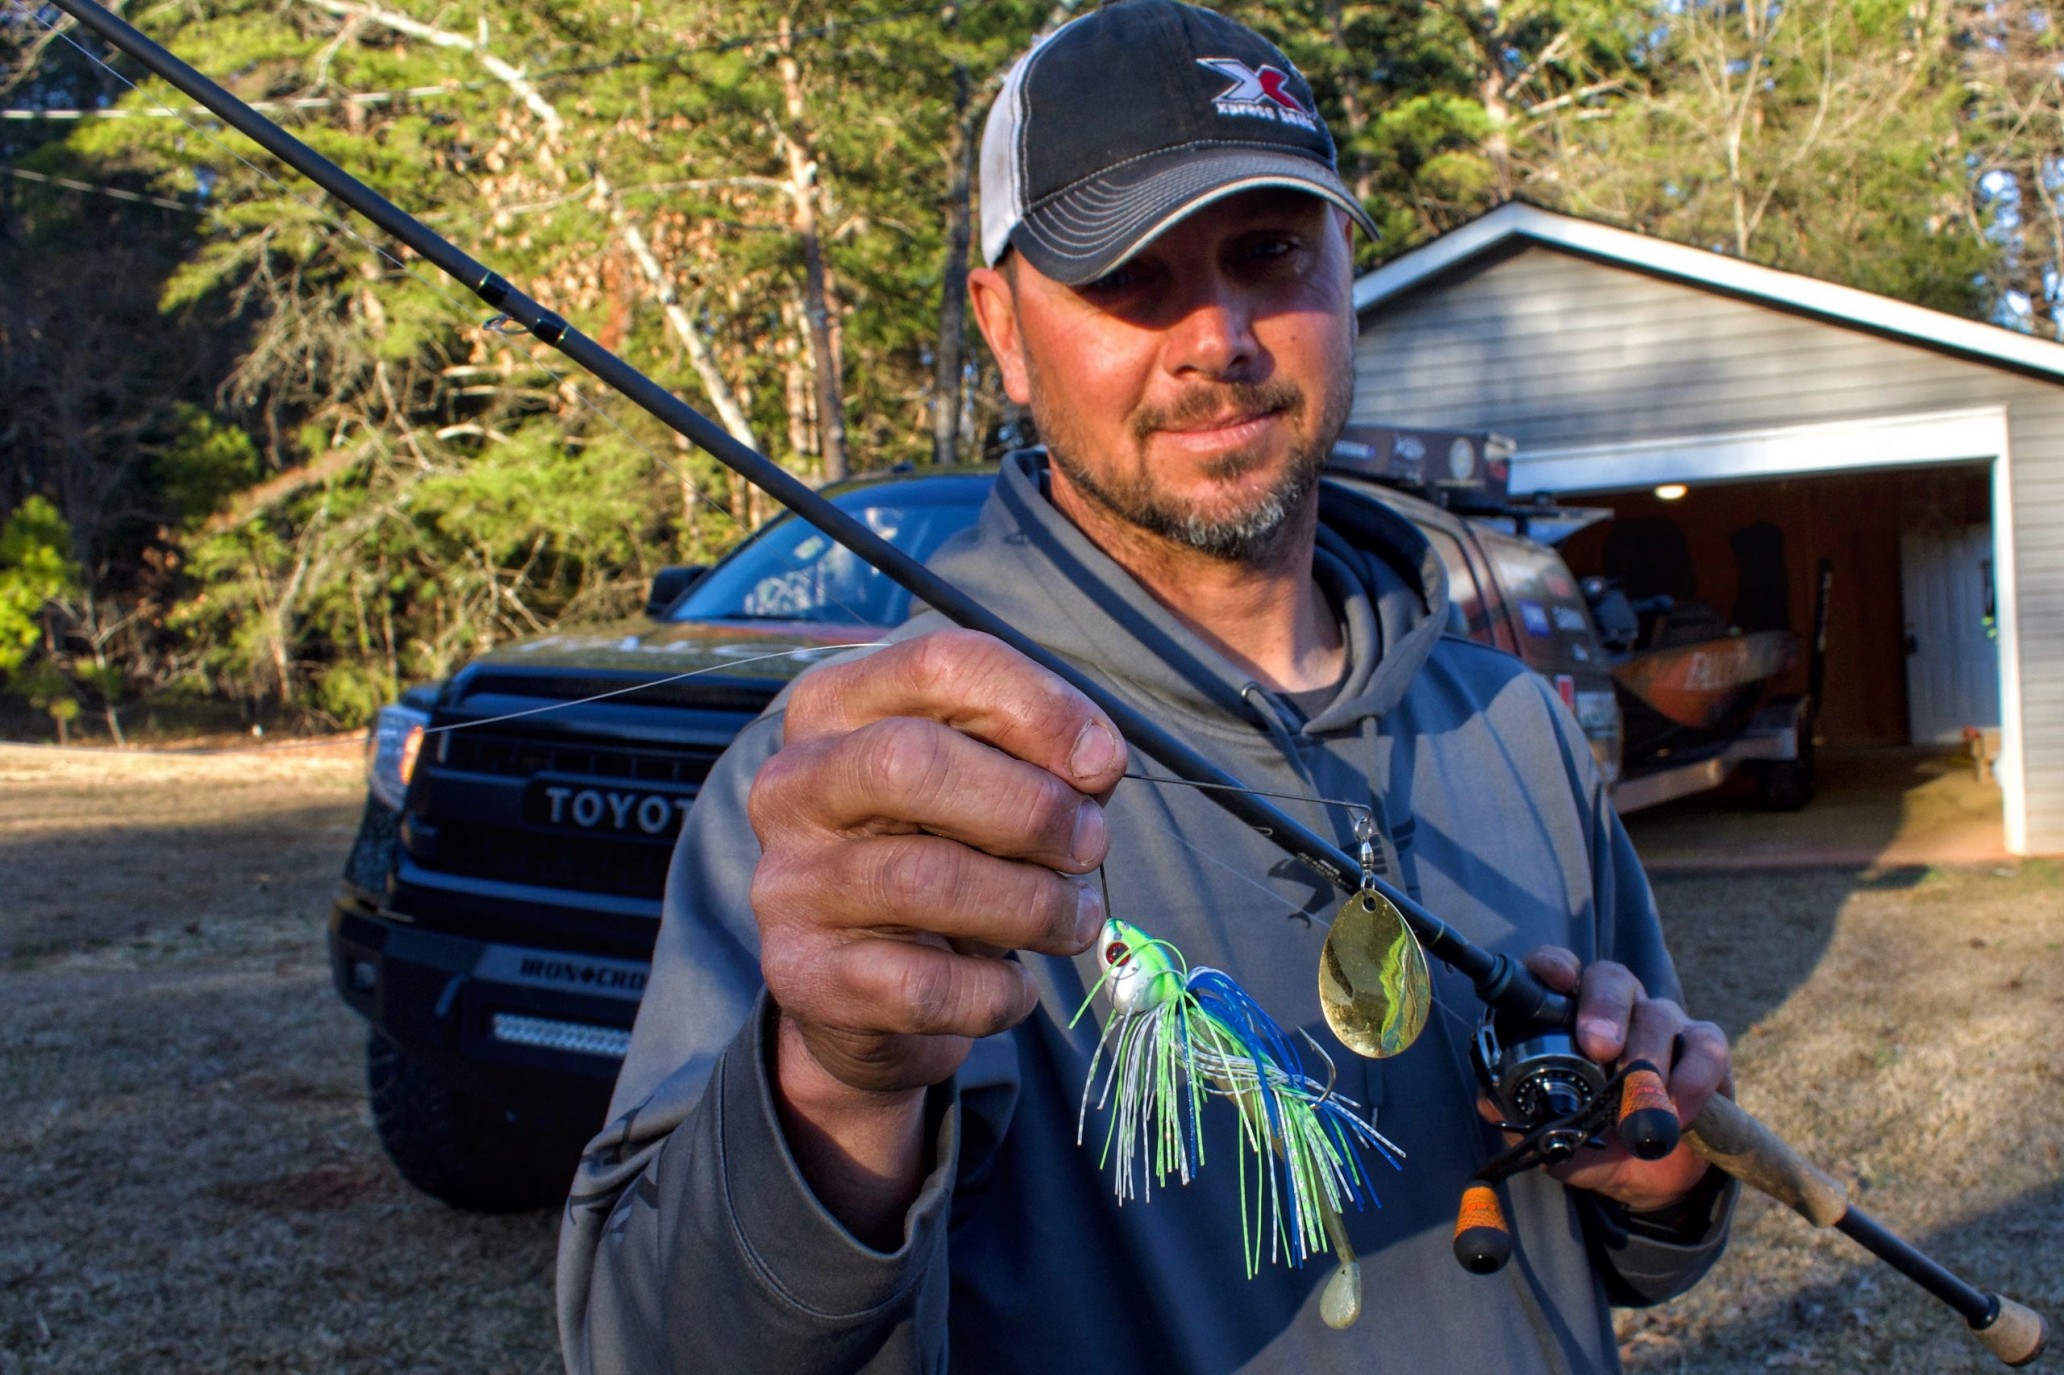 The Technique Series: The Spinnerbait featuring Jason Christie 